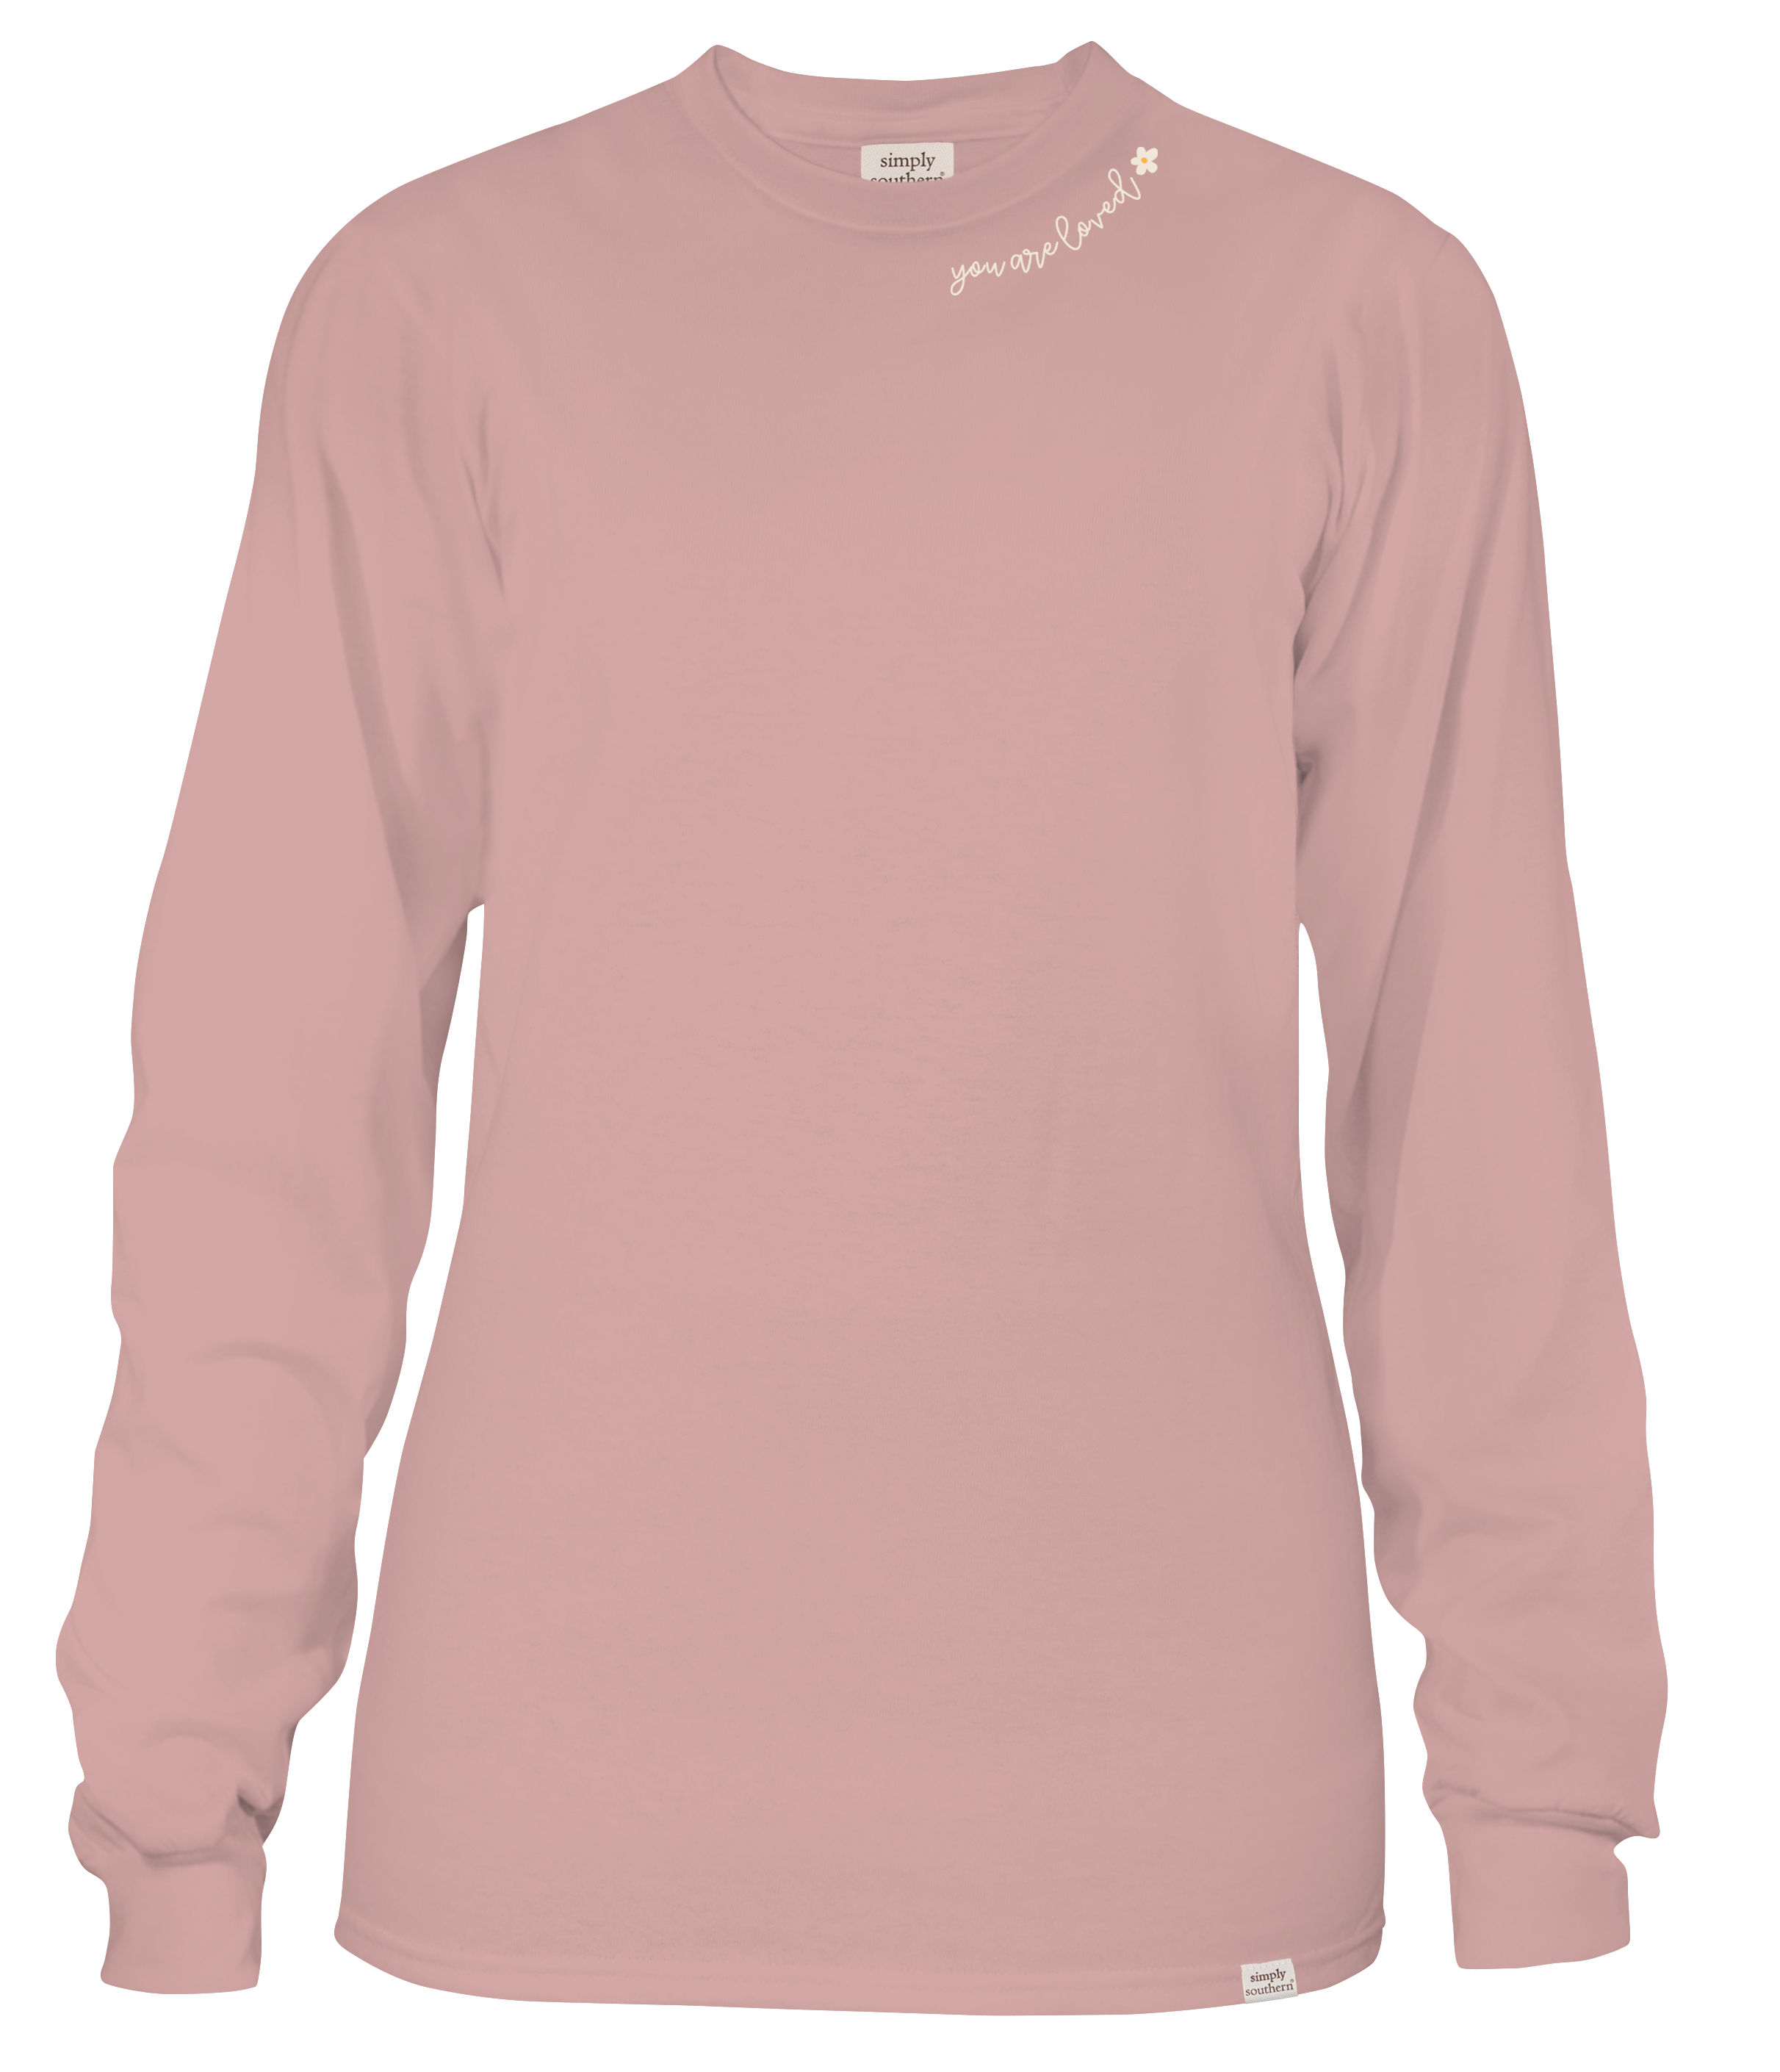 'You Are' Affirmations Long Sleeve Tee by Simply Southern